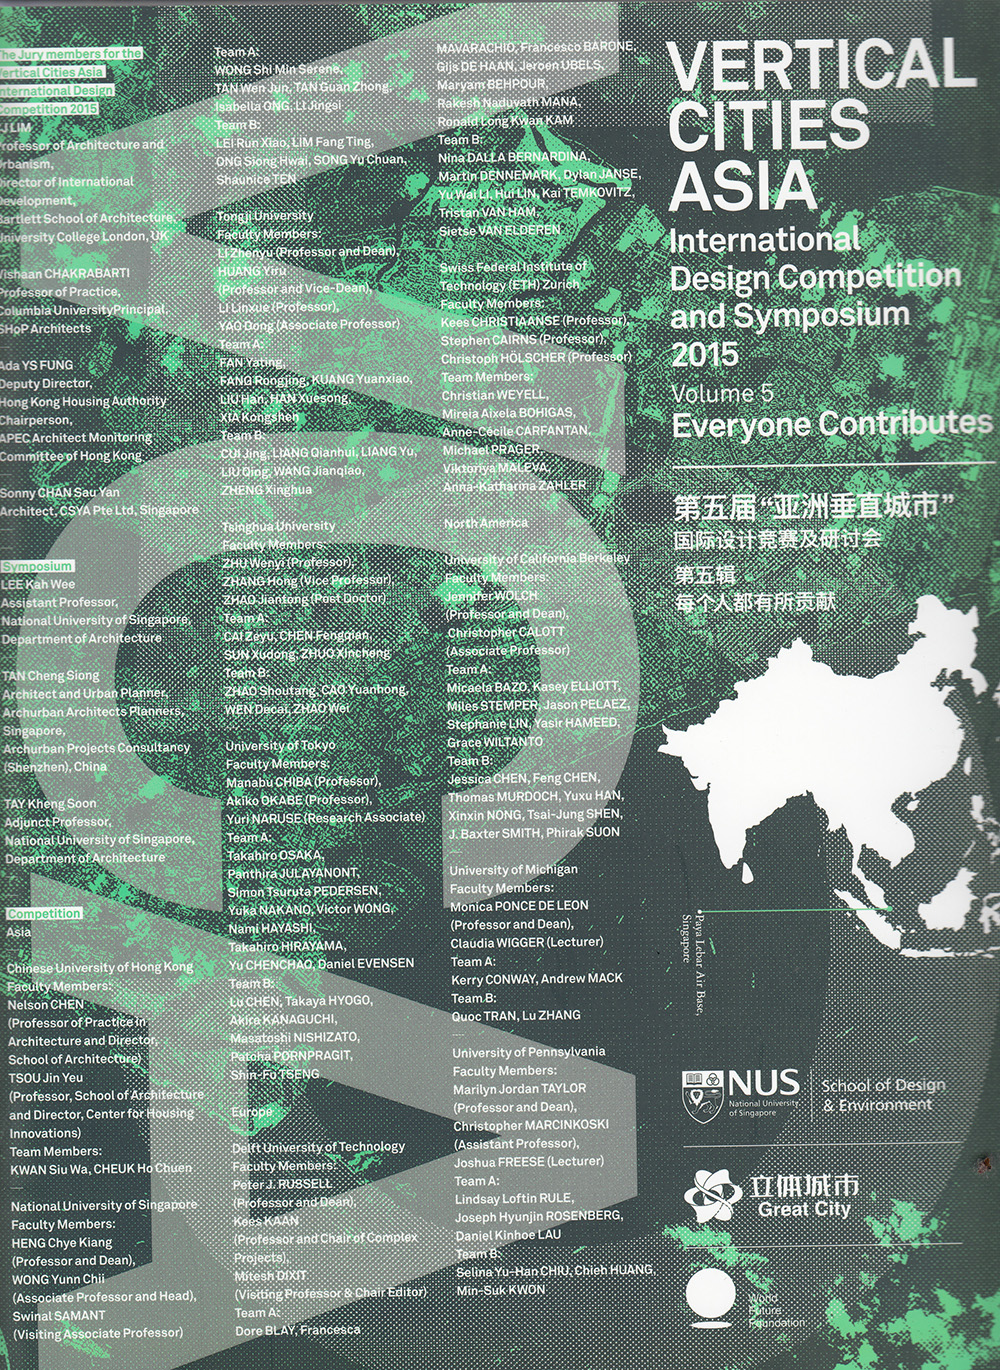 Vertical Cities Asia International Design Competition and Symposium 2015 Volume 5 Everyone Contributes